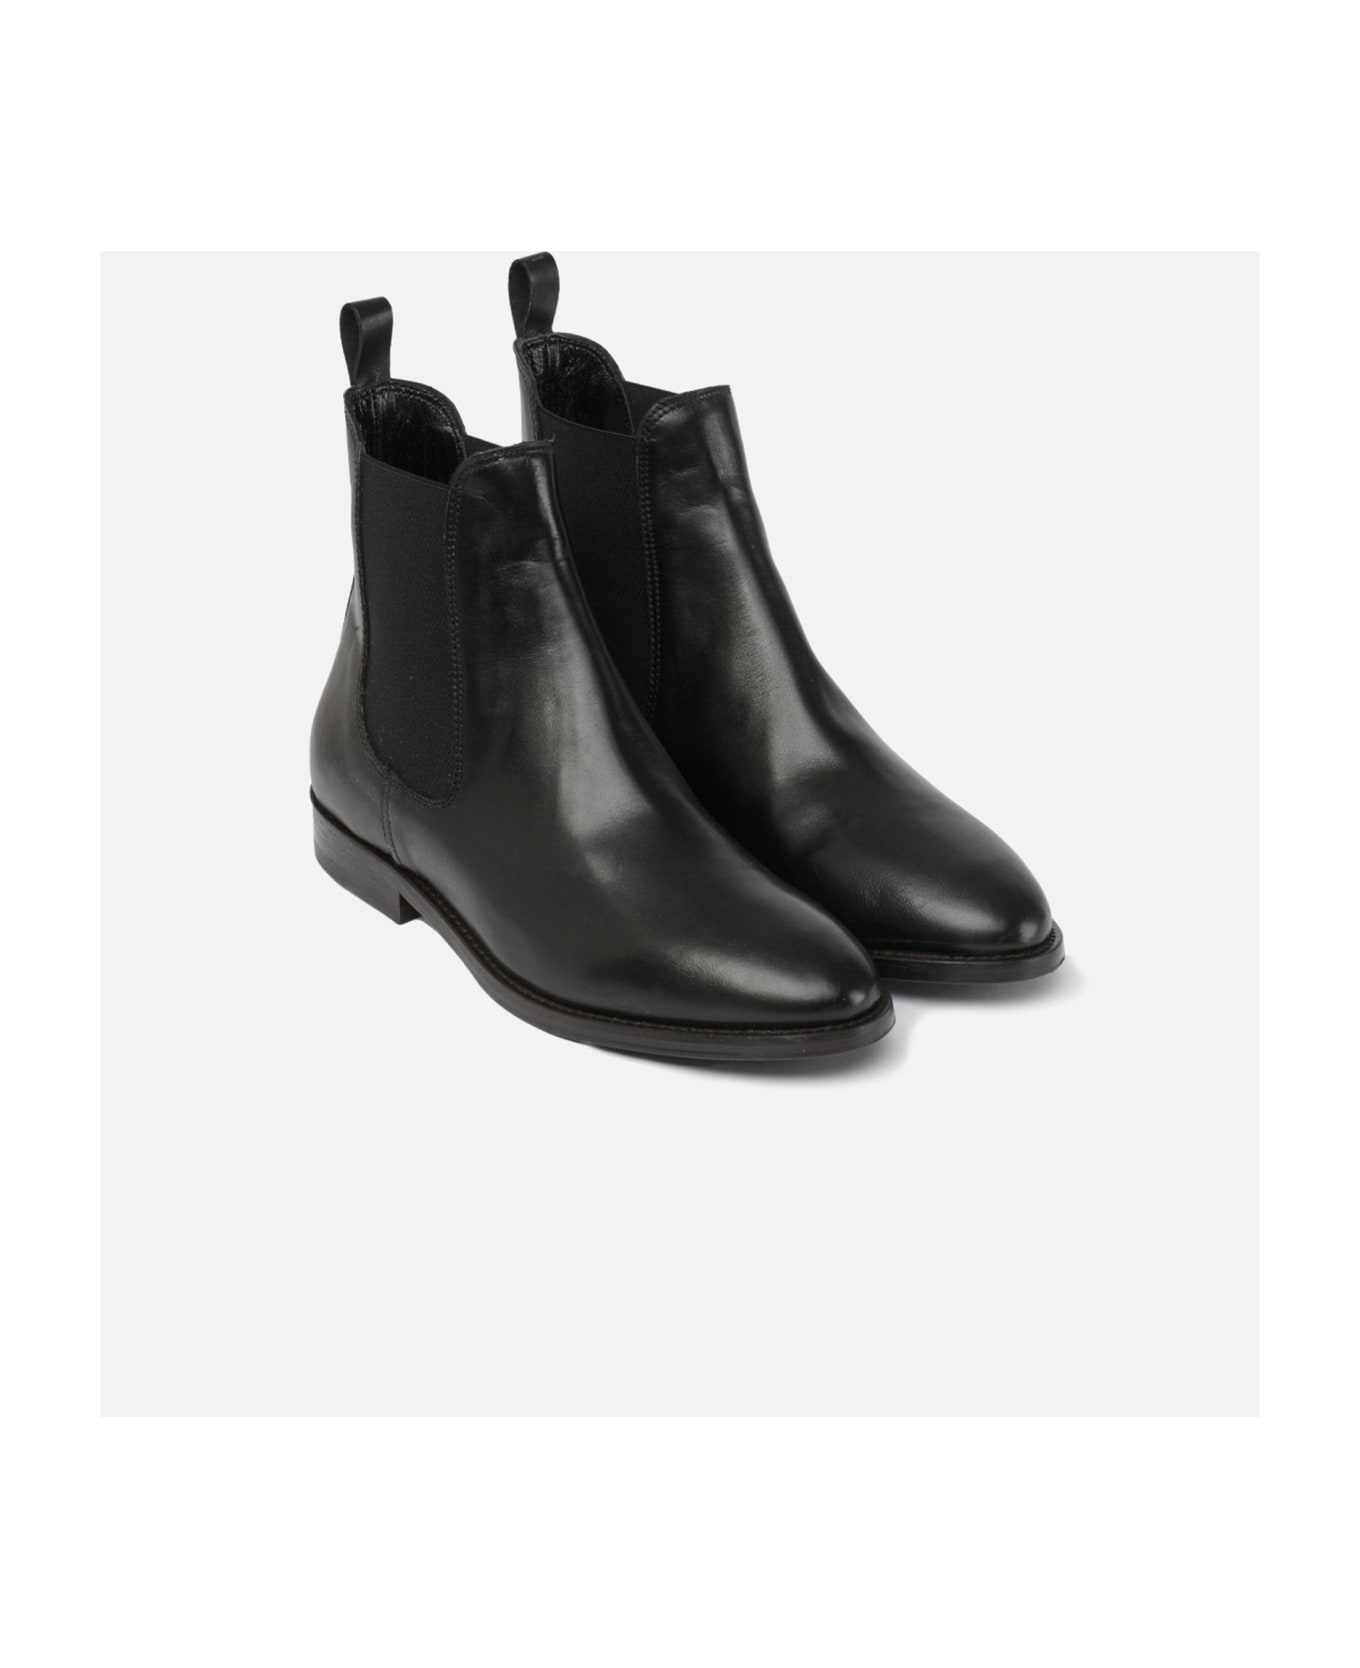 CB Made in Italy Leather Boots Sessanta - Black ブーツ